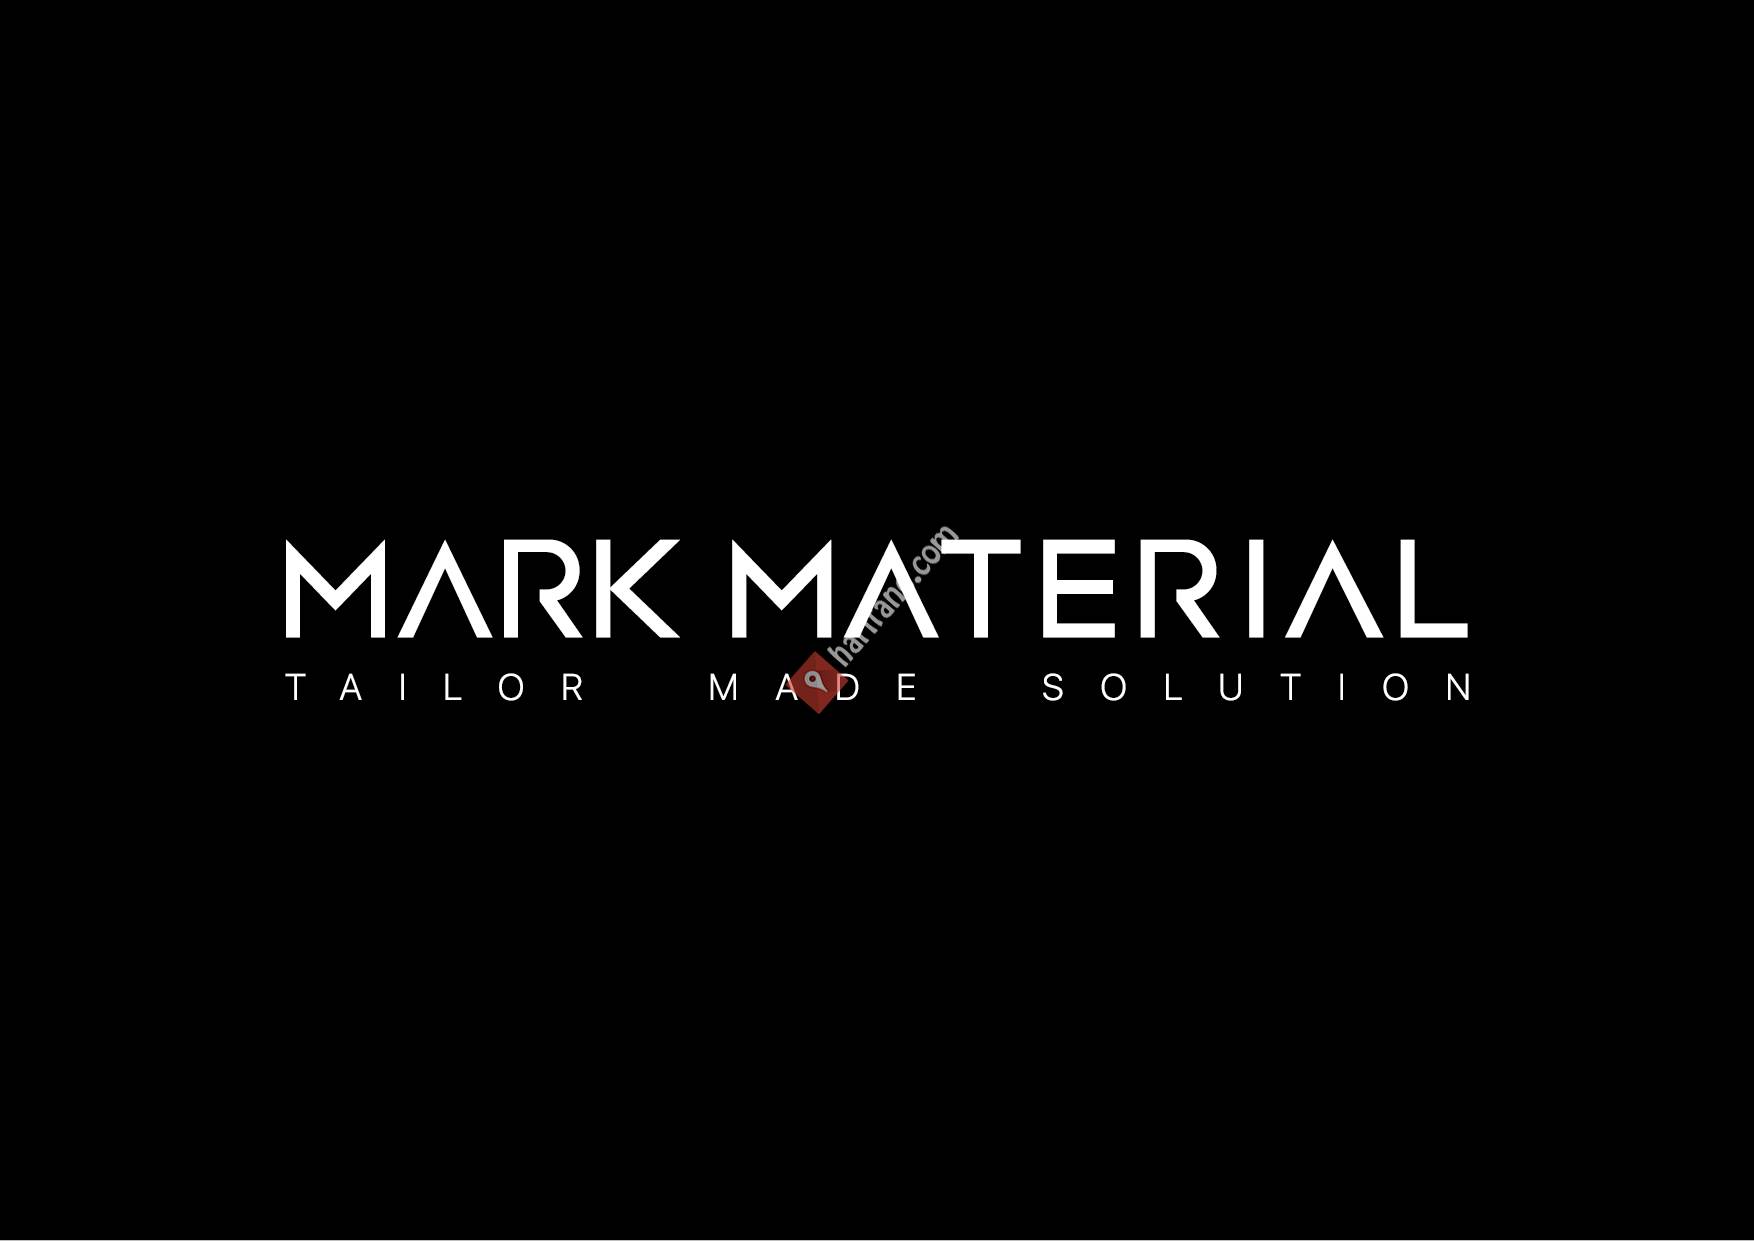 Mark Material Textile and Chemical Ltd